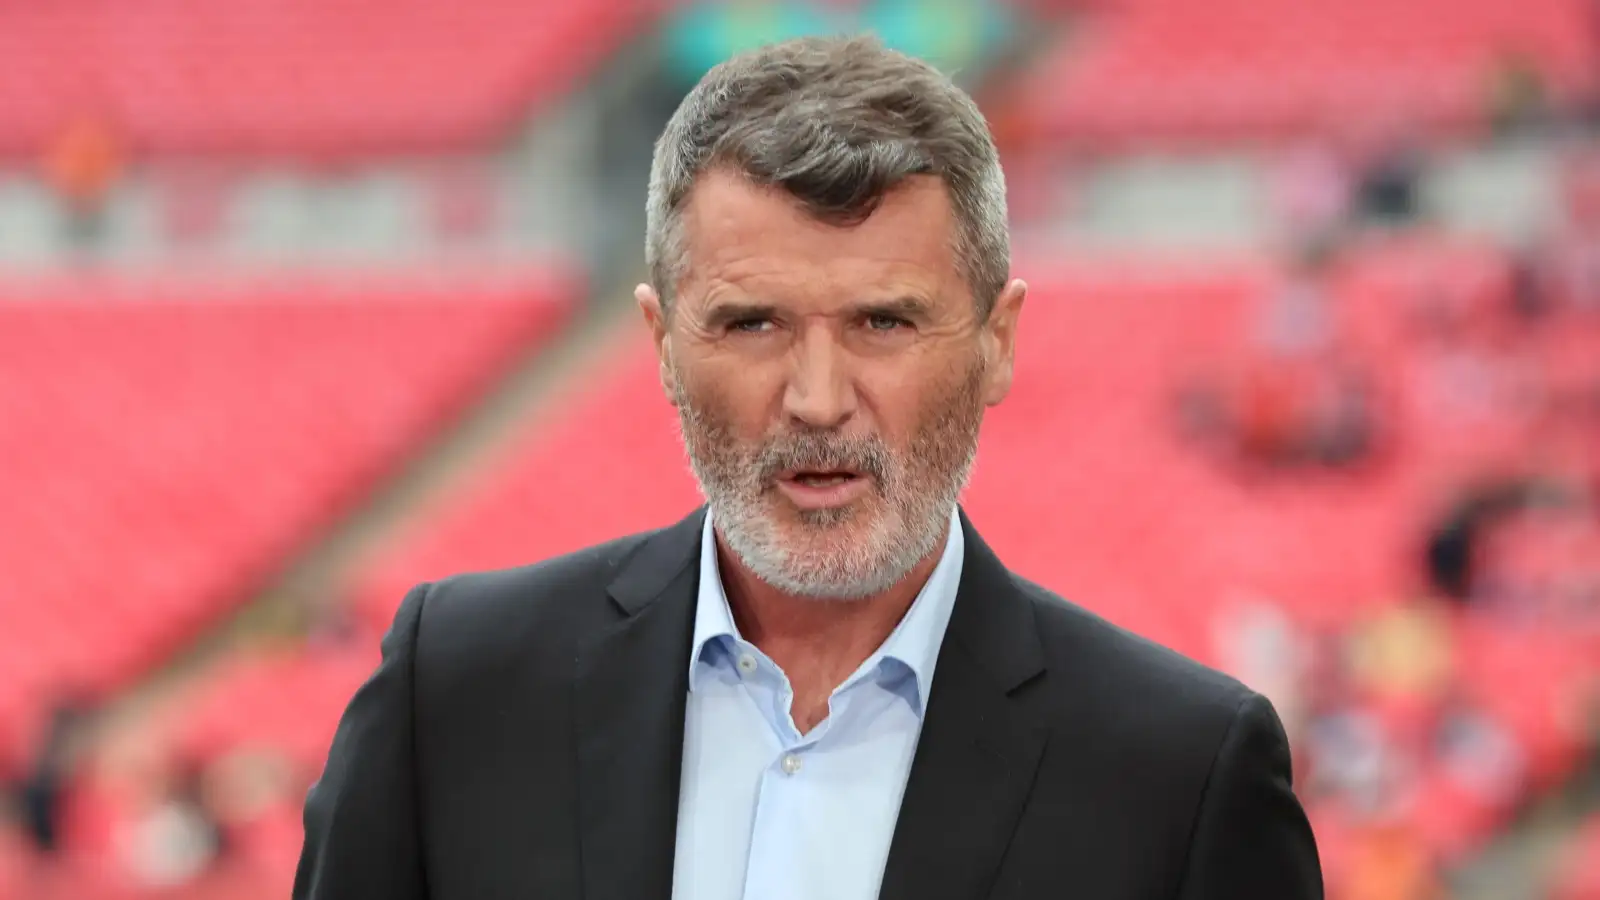 Reading 13 of Roy Keane’s ‘film reviews’ will leave you in hysterics